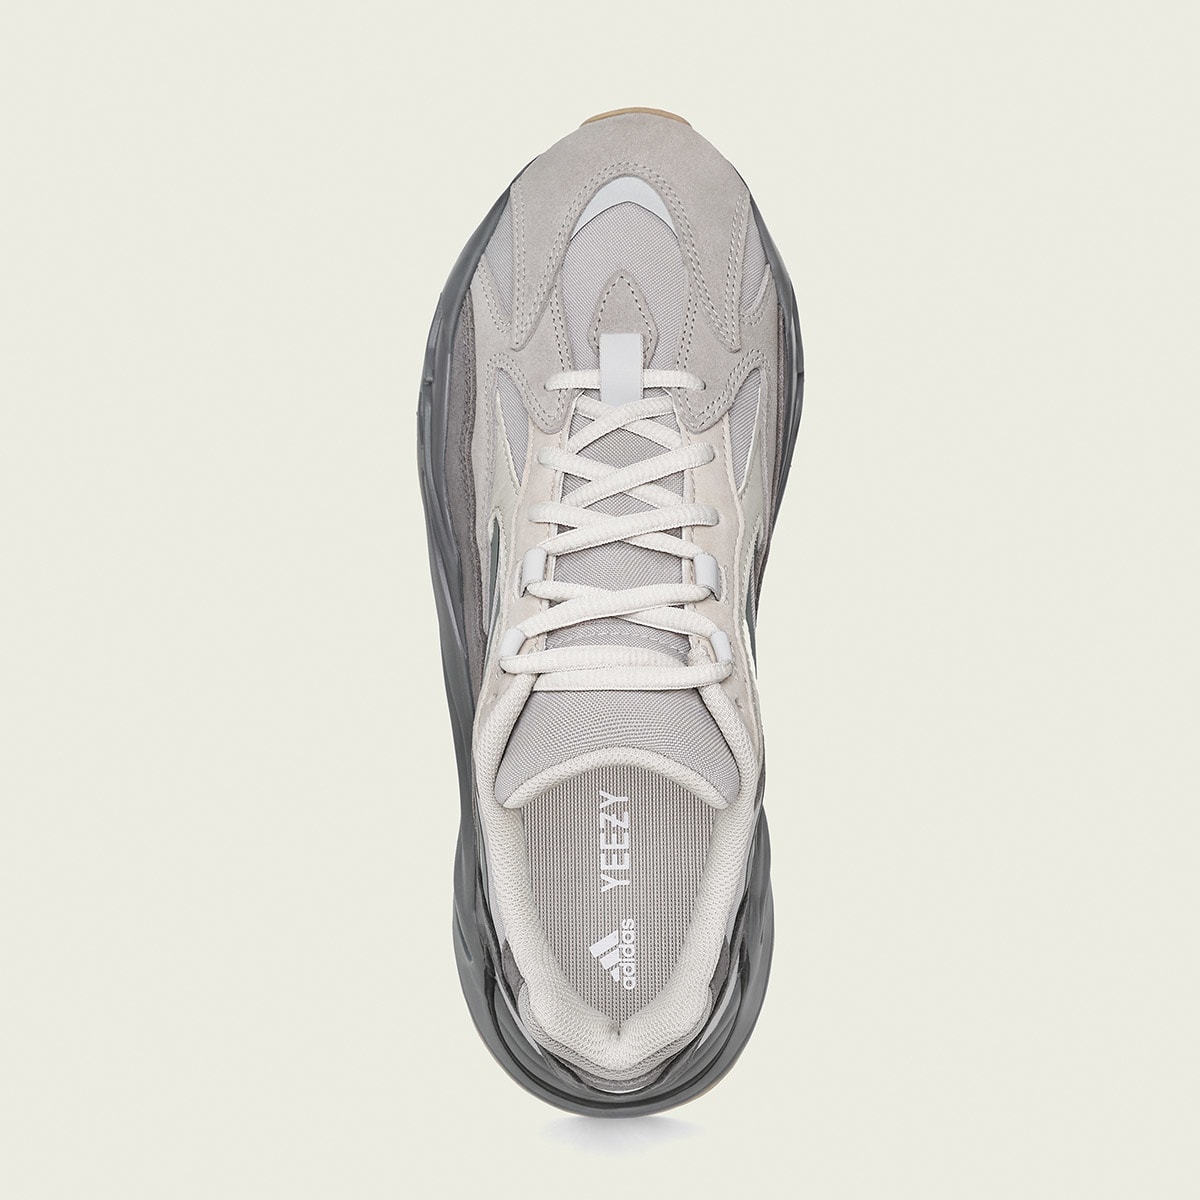 Yeezy Boost 700 V2 (Tephra) | END. Launches